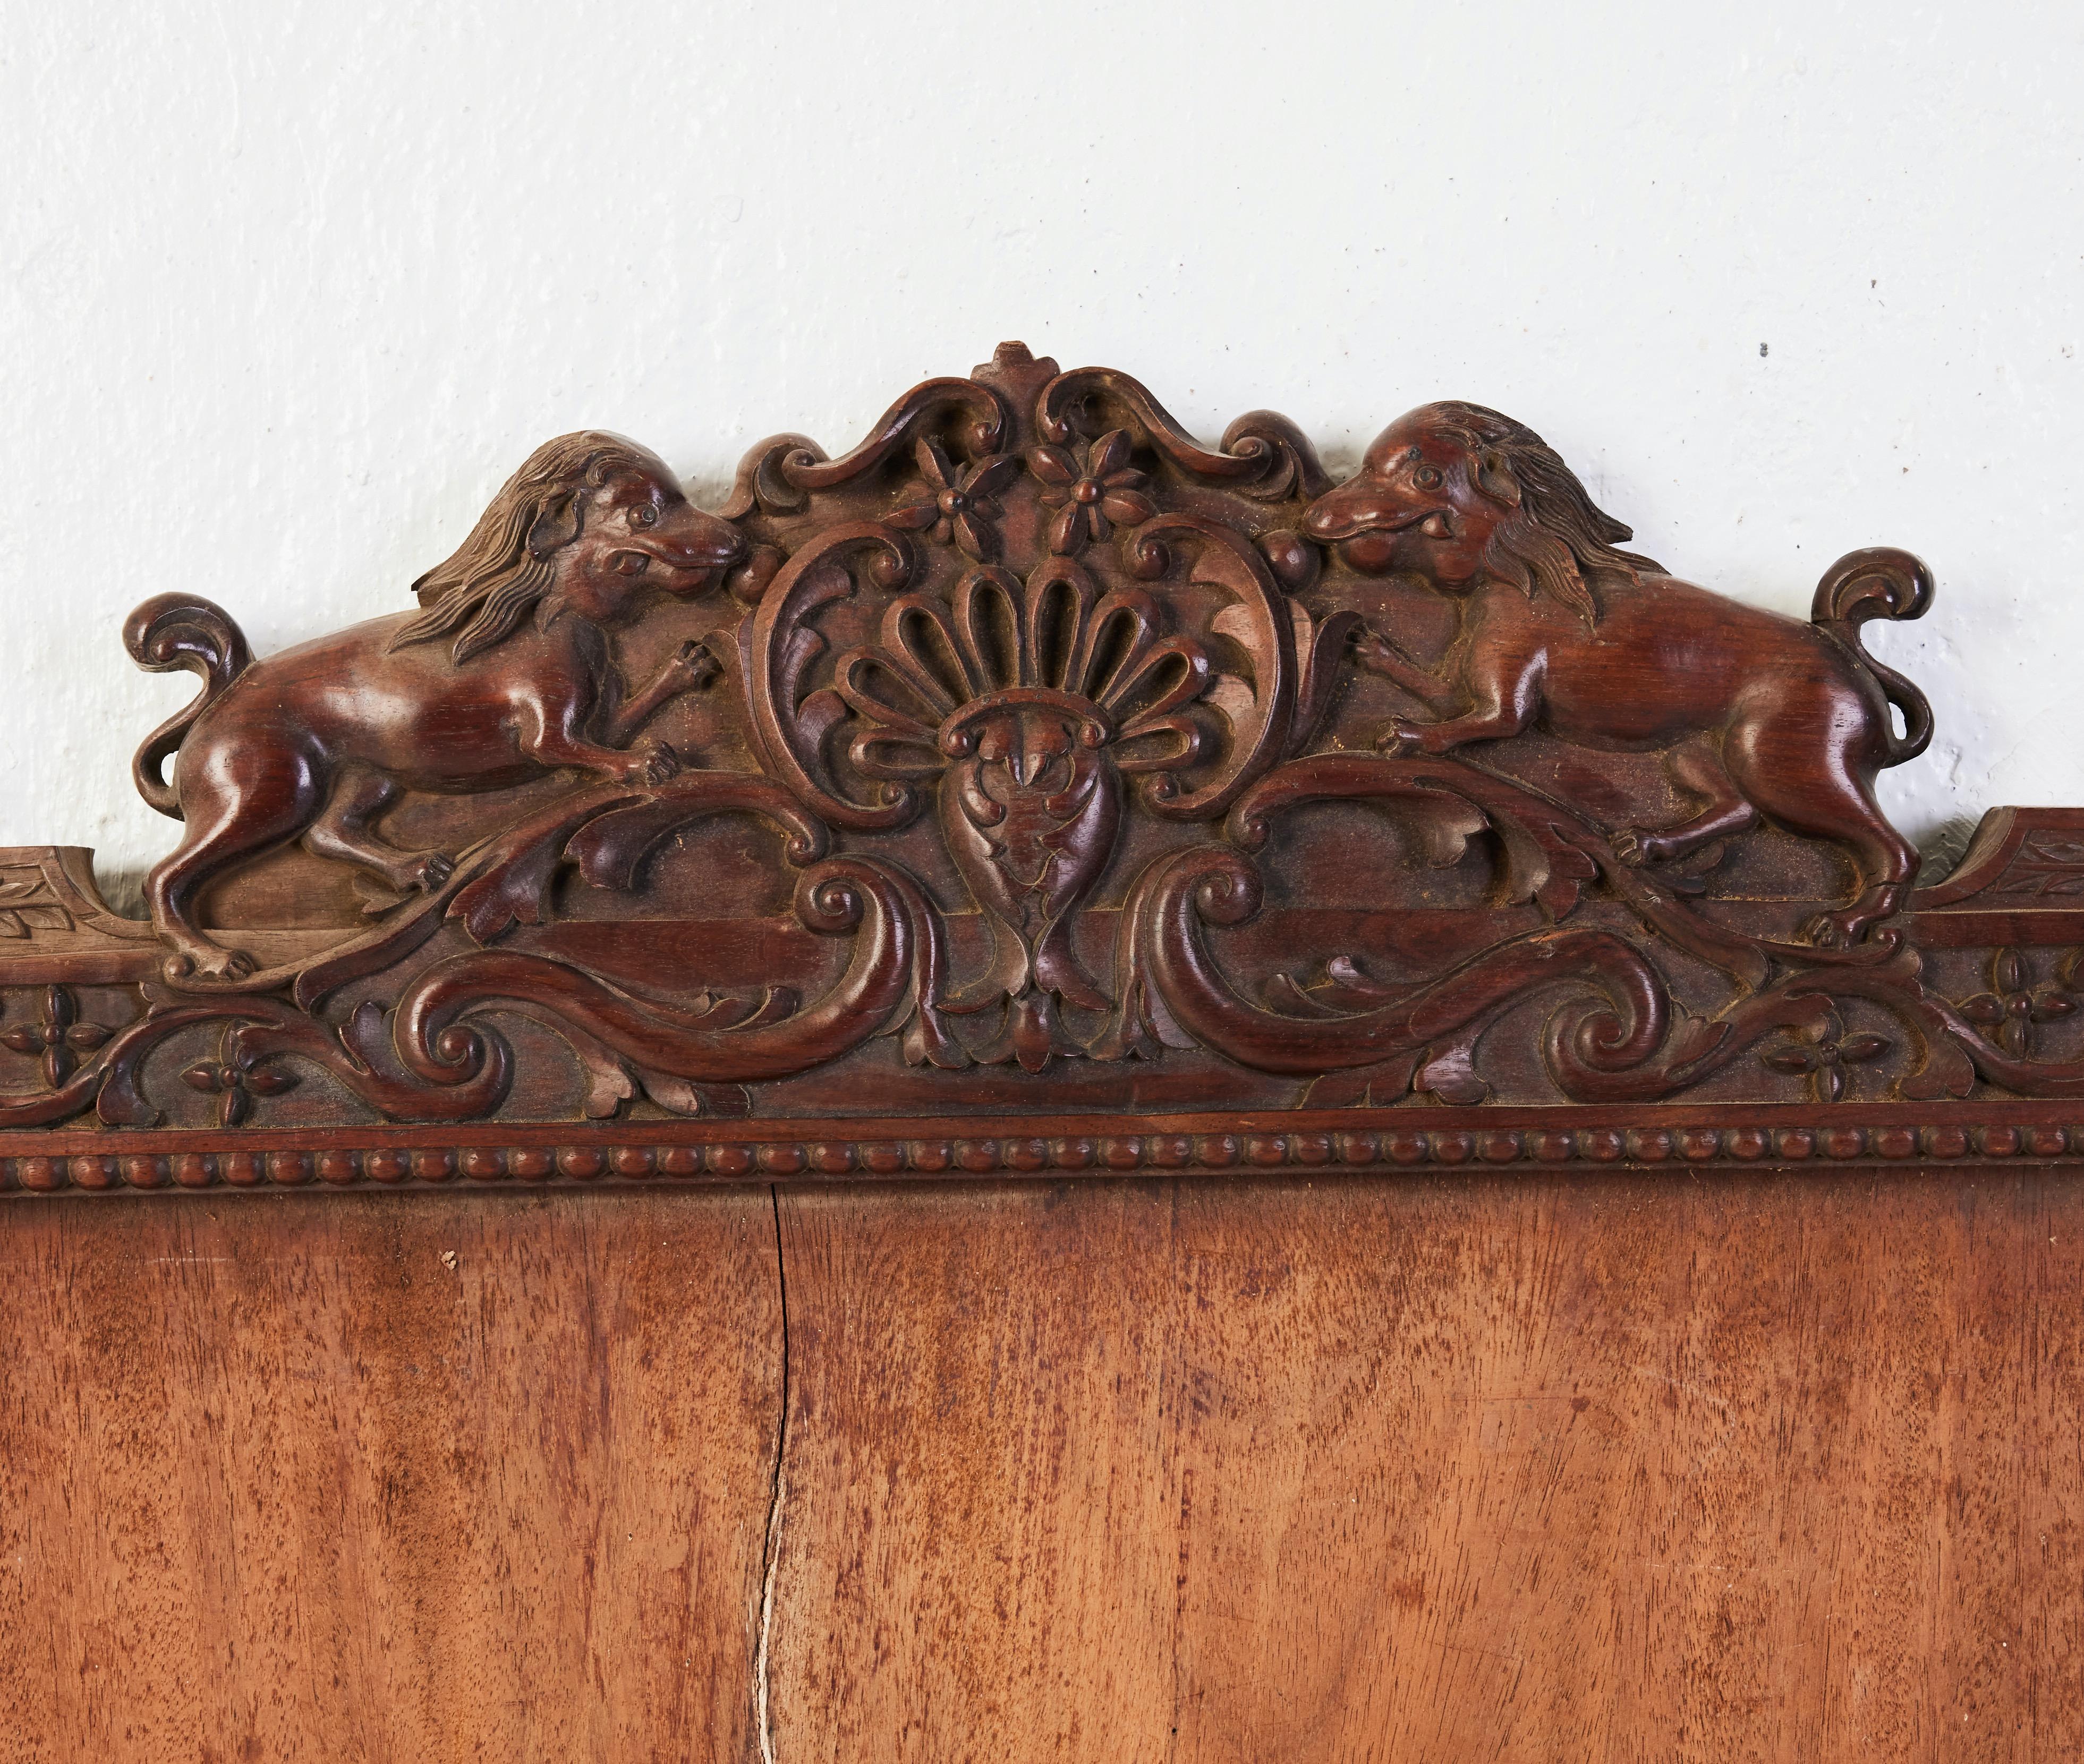 A large 19th or 20th century Asian, possibly Chinese, carved mirror frame. Heavy Asian wood. The top with carving similar to a crest and two Foo dogs facing each other. Probably made for export. Possibly originally with a painted mirror glass. The